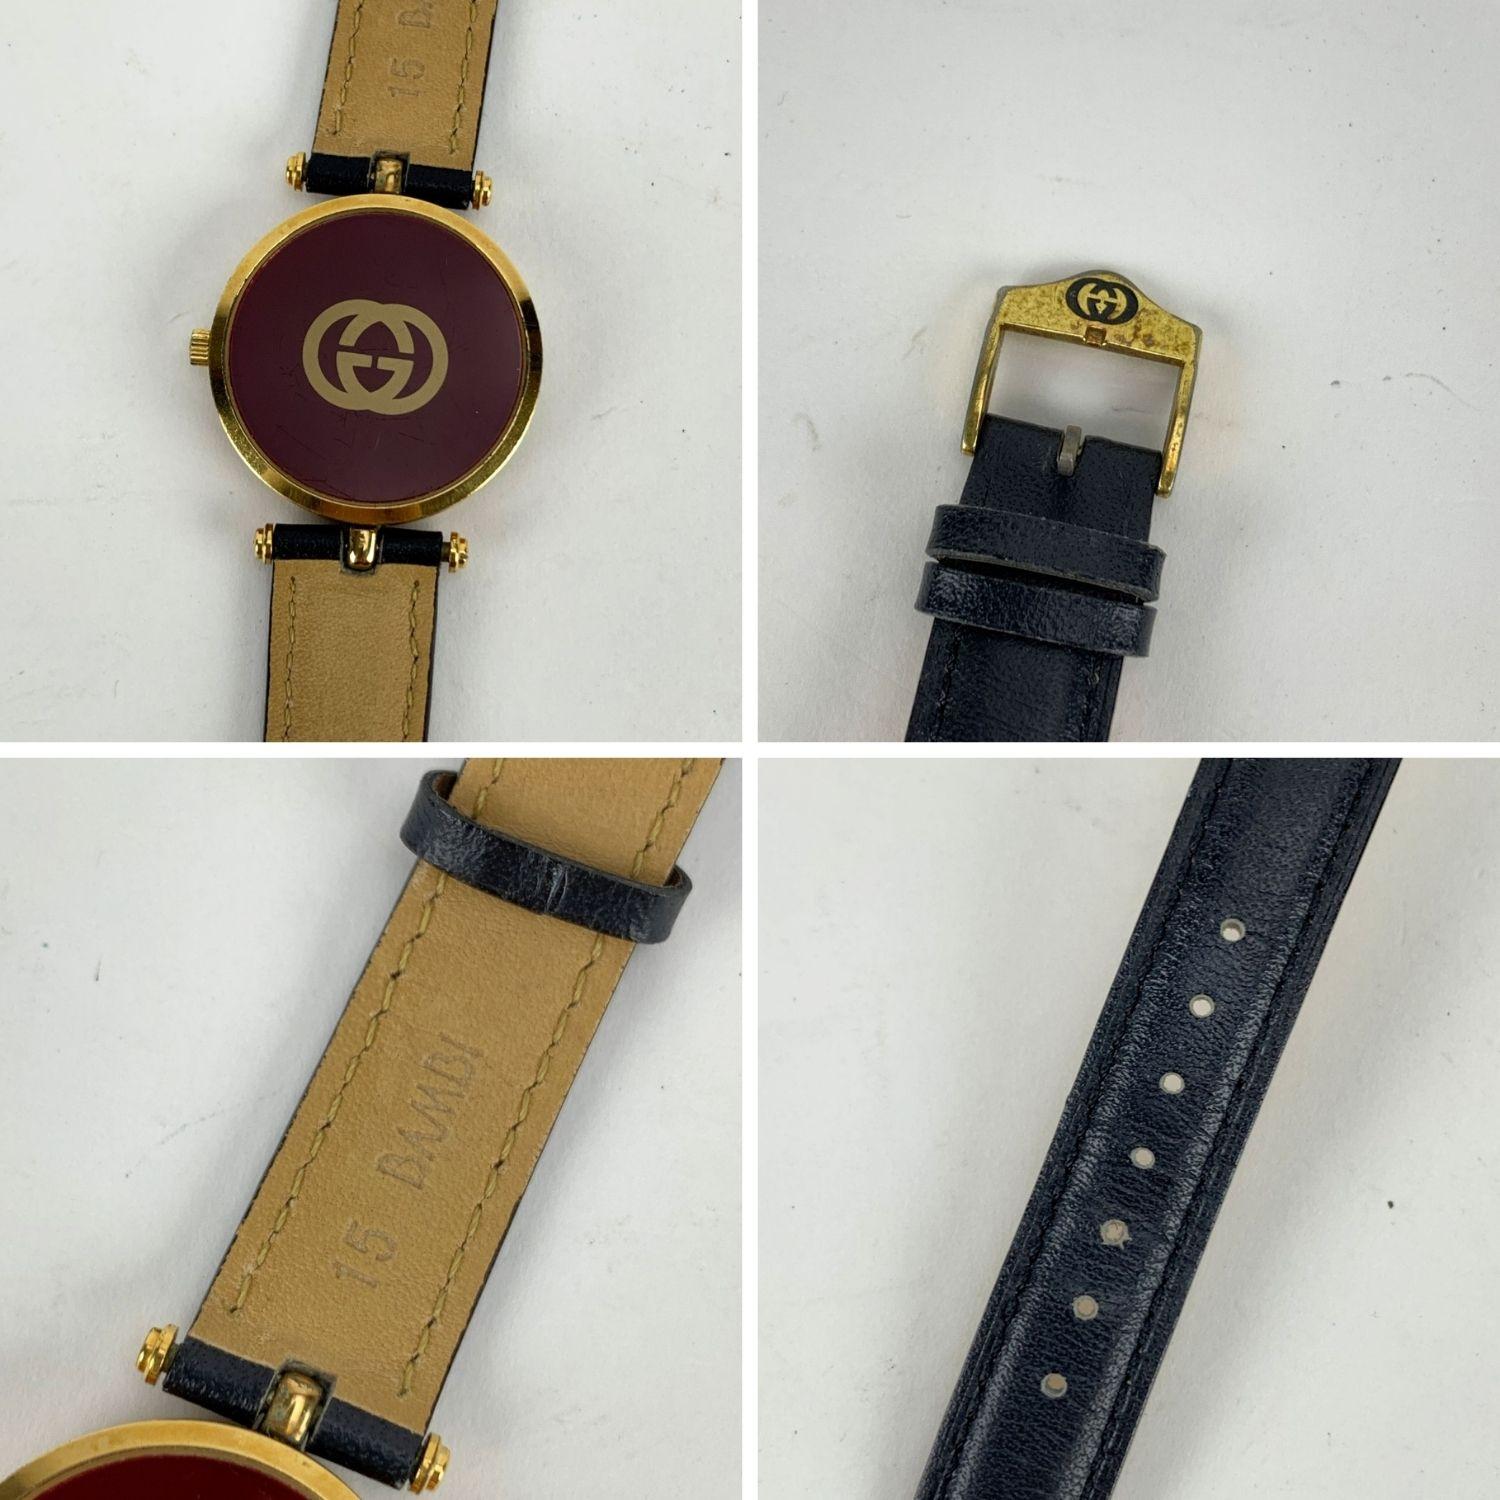 Beautiful vintage wristwatch by GUCCI. Round gold metal stainless steel case. Green/Red/Green stripes around the case. Gold tone dial. Swiss Made Quartz Movement. Black leather wrist strap with 7 holse adjustment. GG - GUGGI buckle. Roman numbers.